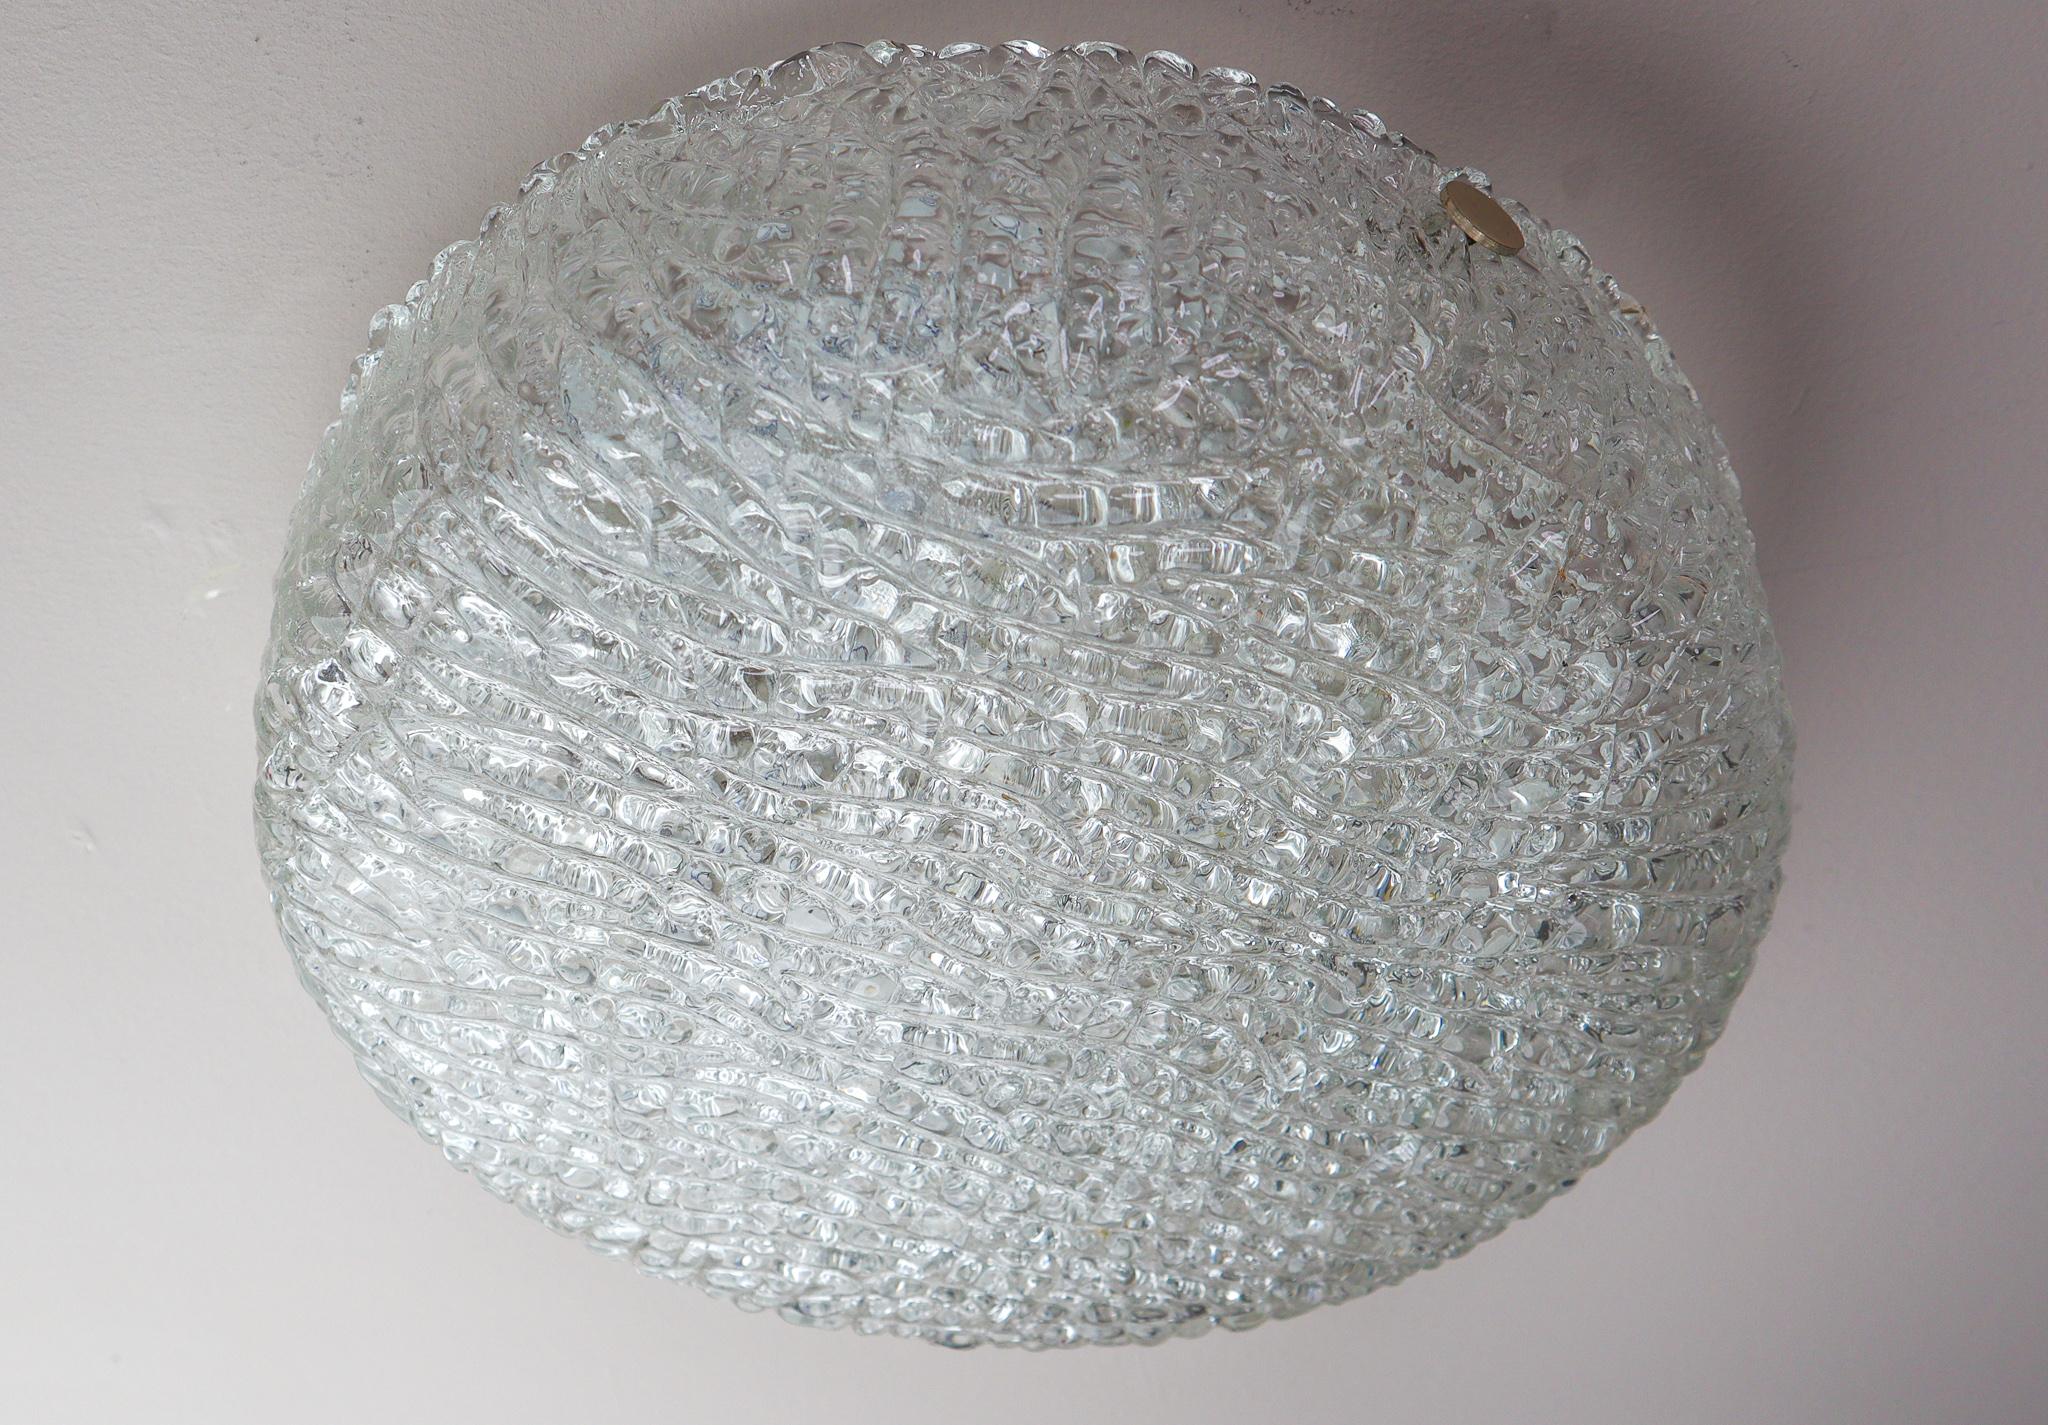 Gorgeous flush mount ceiling light made of heavy textured clear iced glass on a white metal frame with nickel finals. Manufactured by Kaiser Lighting, Germany in the 1960s. Manufactured by Kaiser Lighting, Germany in the 1960s. Very good vintage